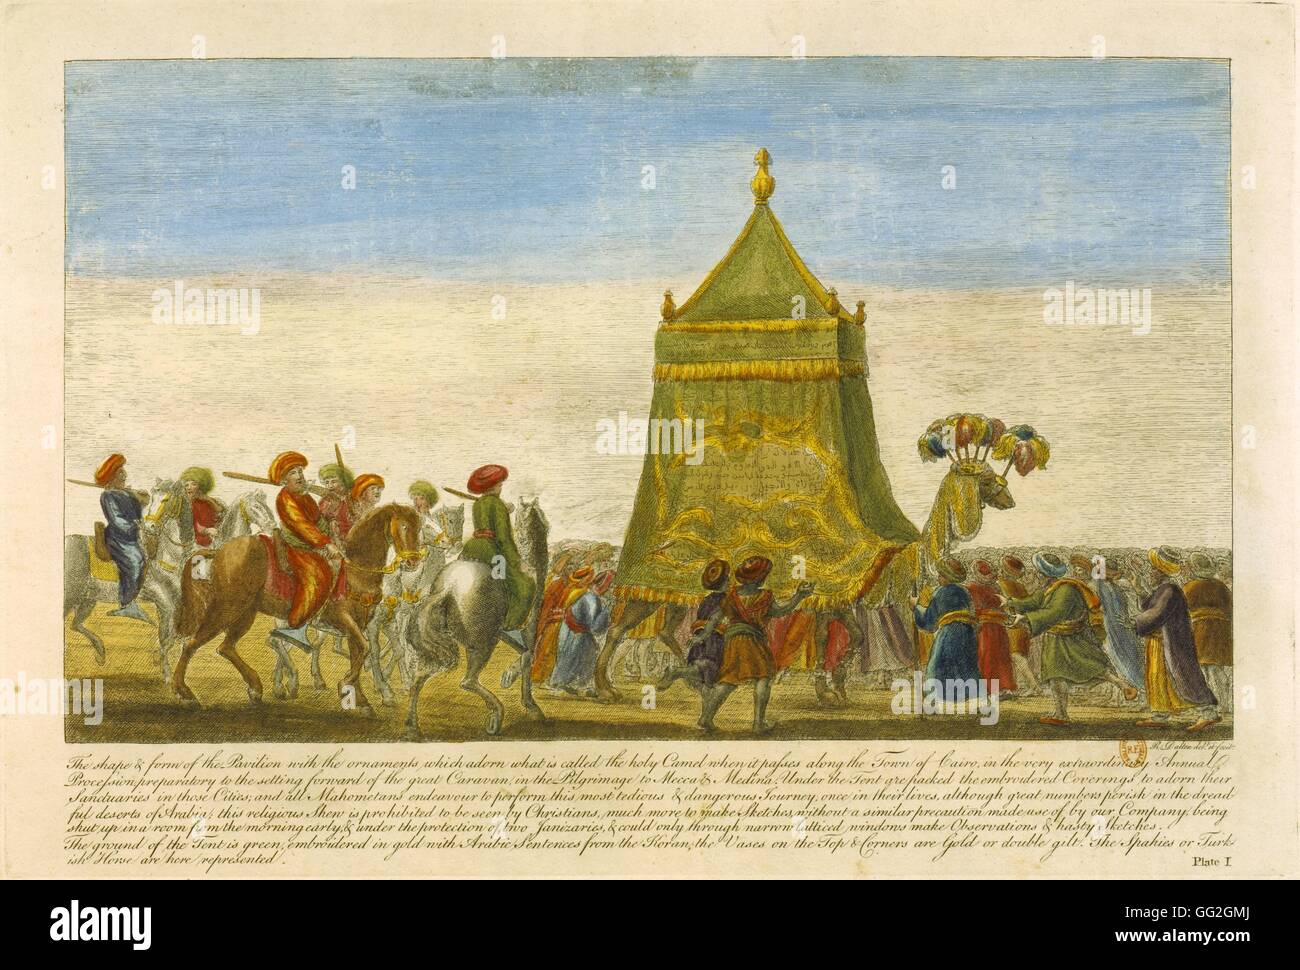 Religious procession for the yearly pilgrimage to Mecca. 1749 Plate 1 from 'Antiquities and Views in Greece and Egypt' Paris, Bibliothèque Nationale de France Stock Photo